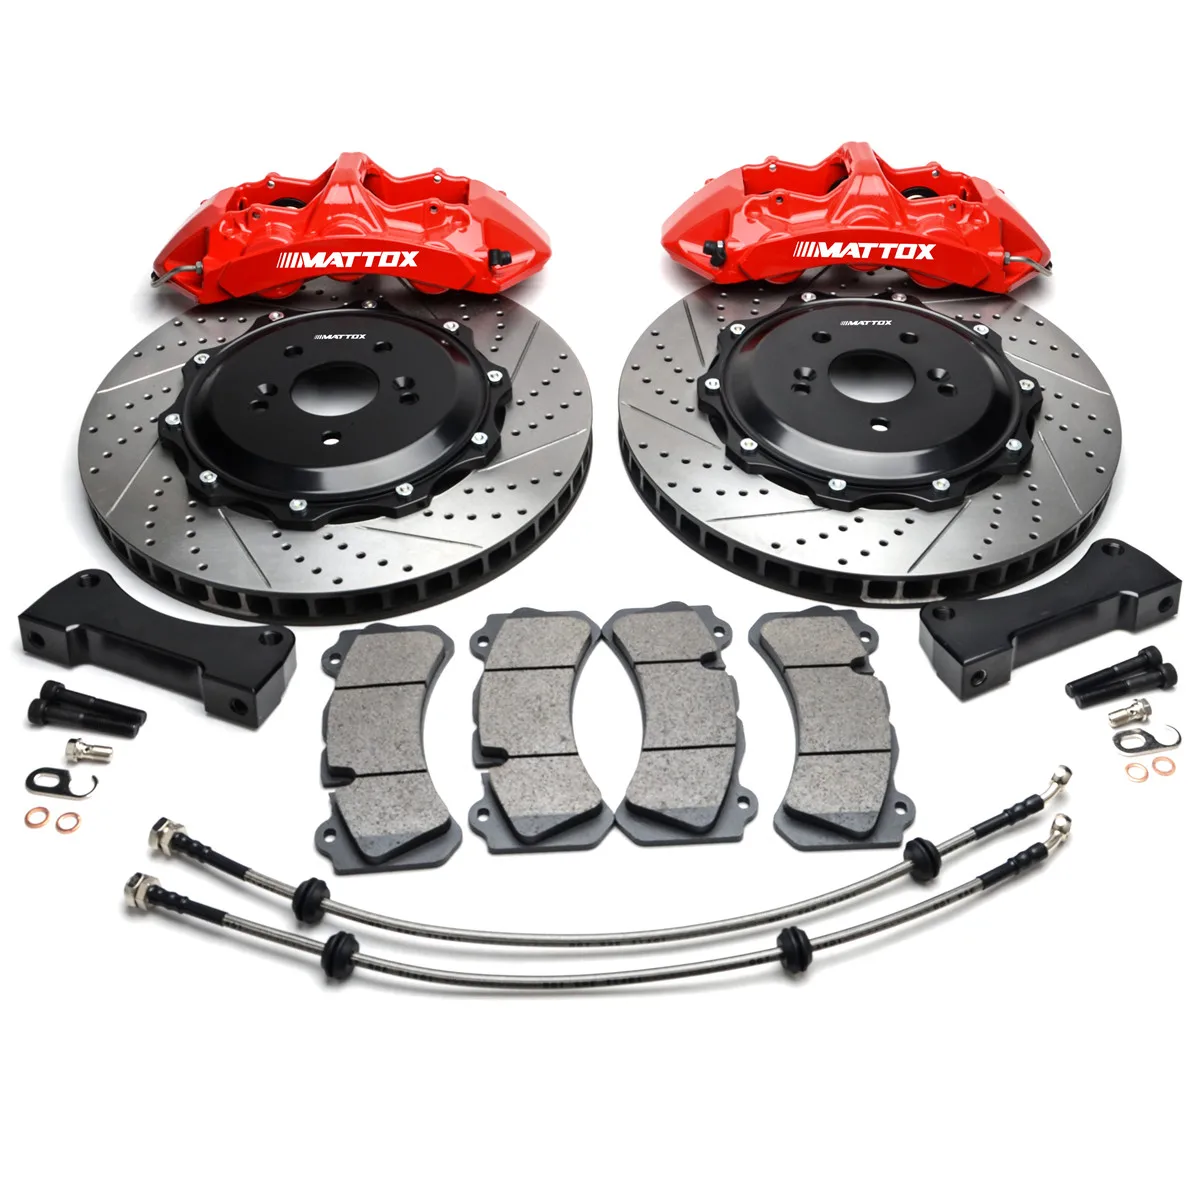 

Mattox Big Brake Kit 405*34mm Brake Disc with One-piece Forged 6POT Piston Capiler for BMW E70 X5 2007 2012 Front 19-22inch